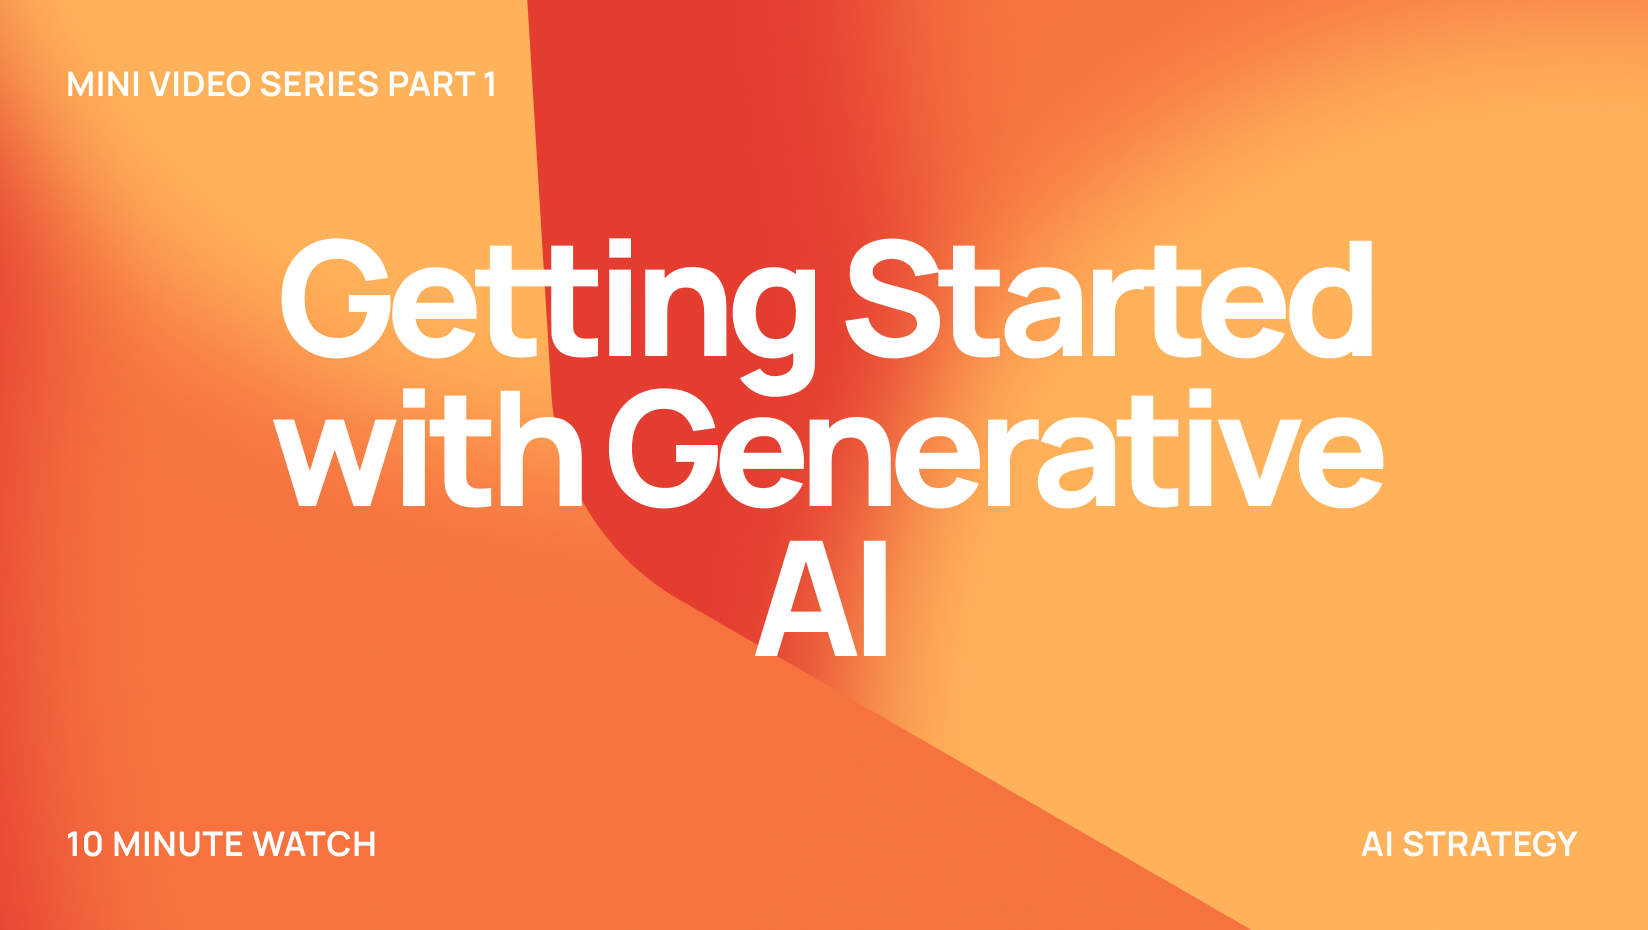 Unleashing Opportunity: A Guide to Getting Started with Generative AI in Your Organization